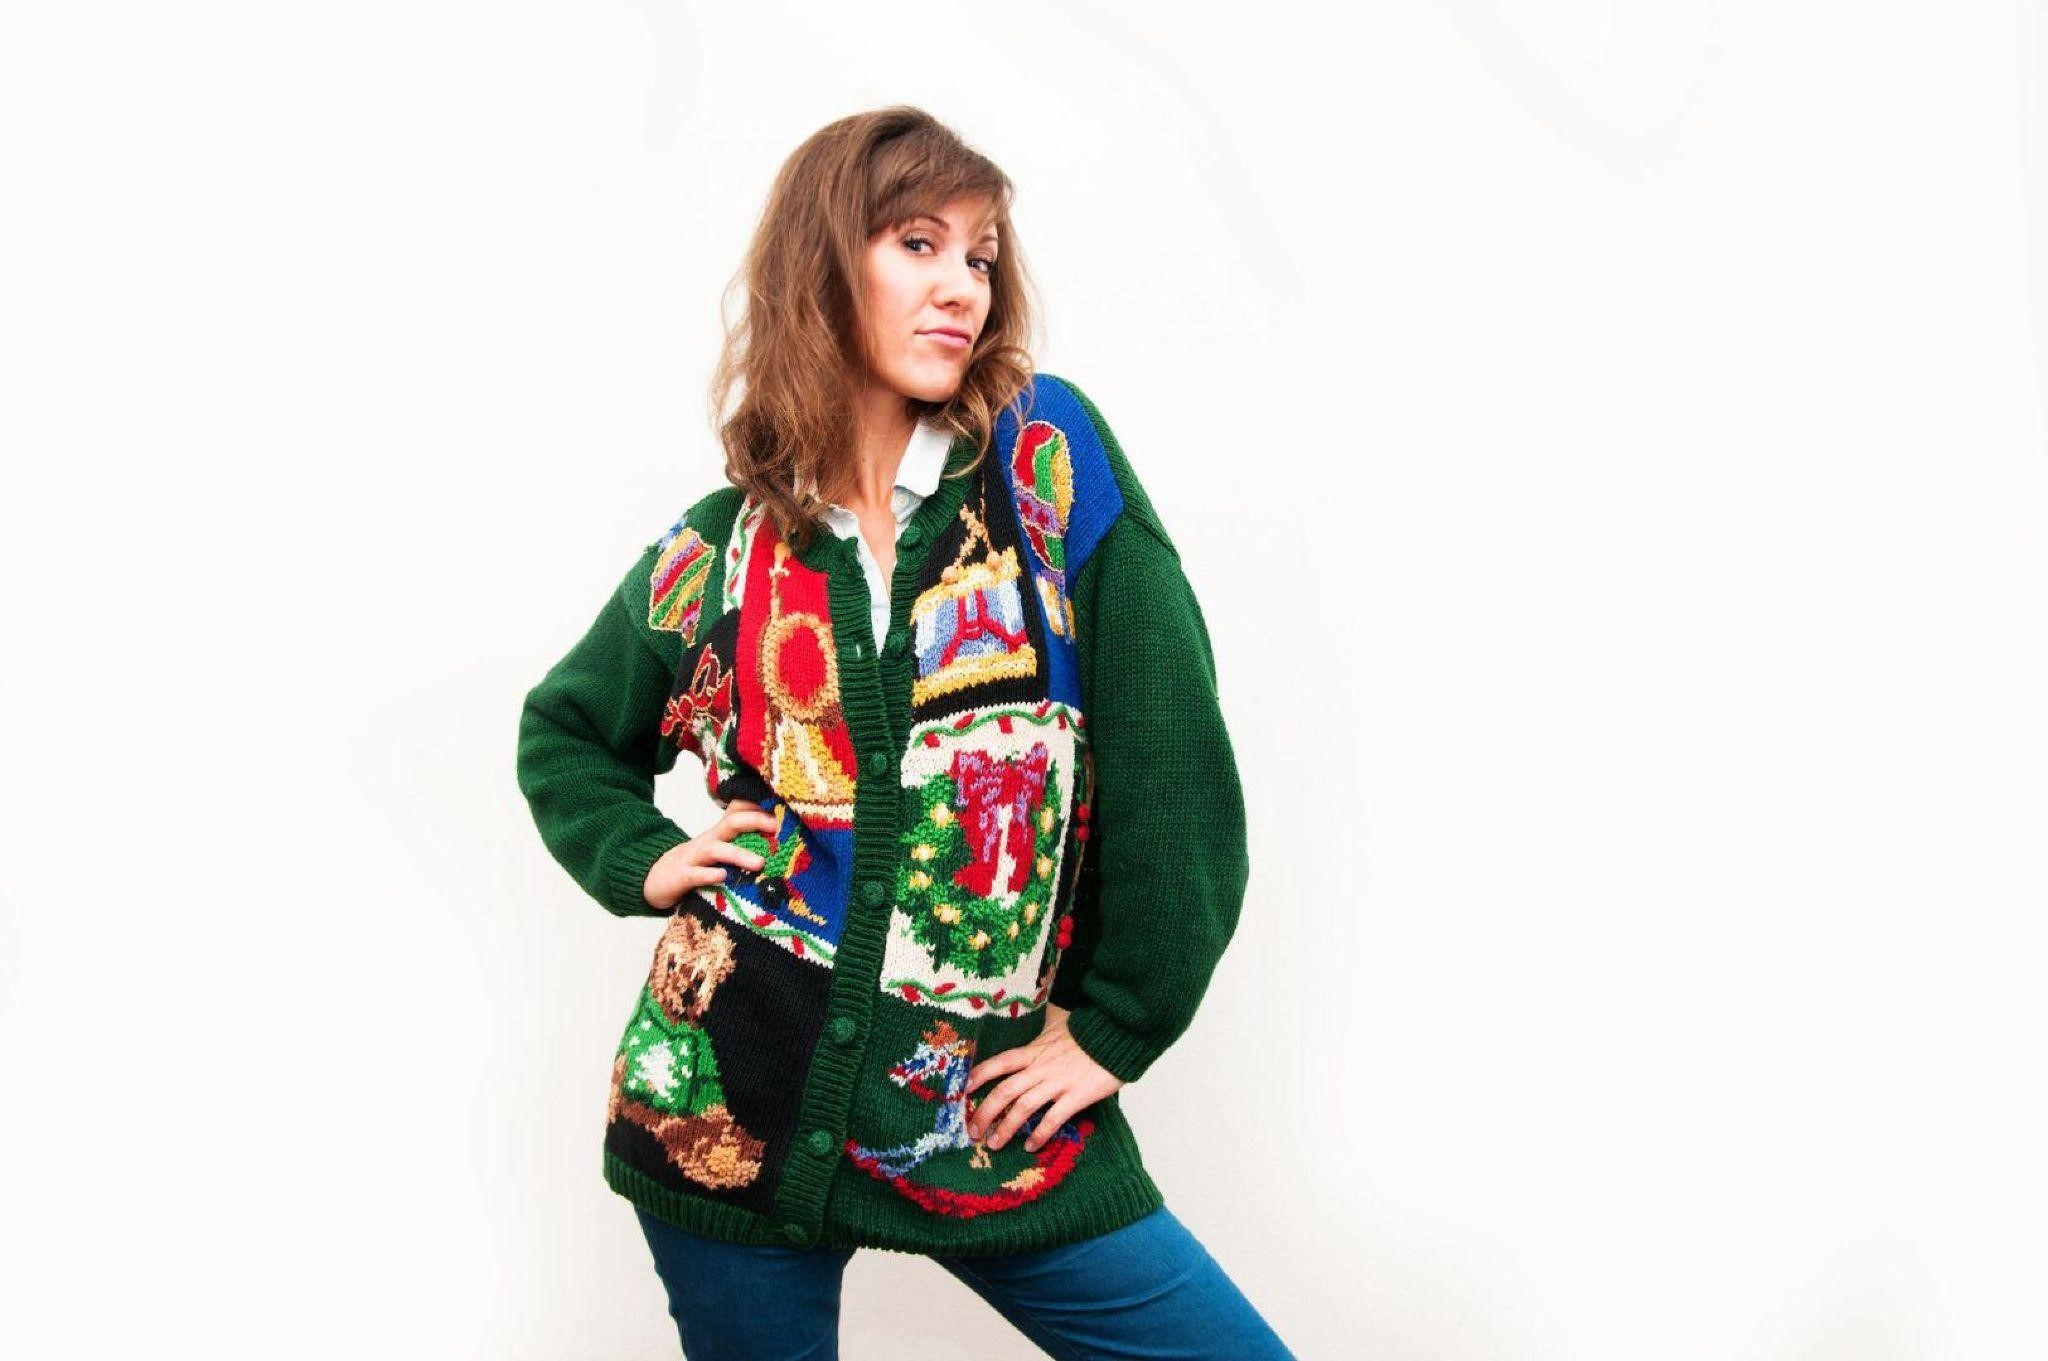 Trending Topics: What's Hot in Ugly Sweaters This Fall?